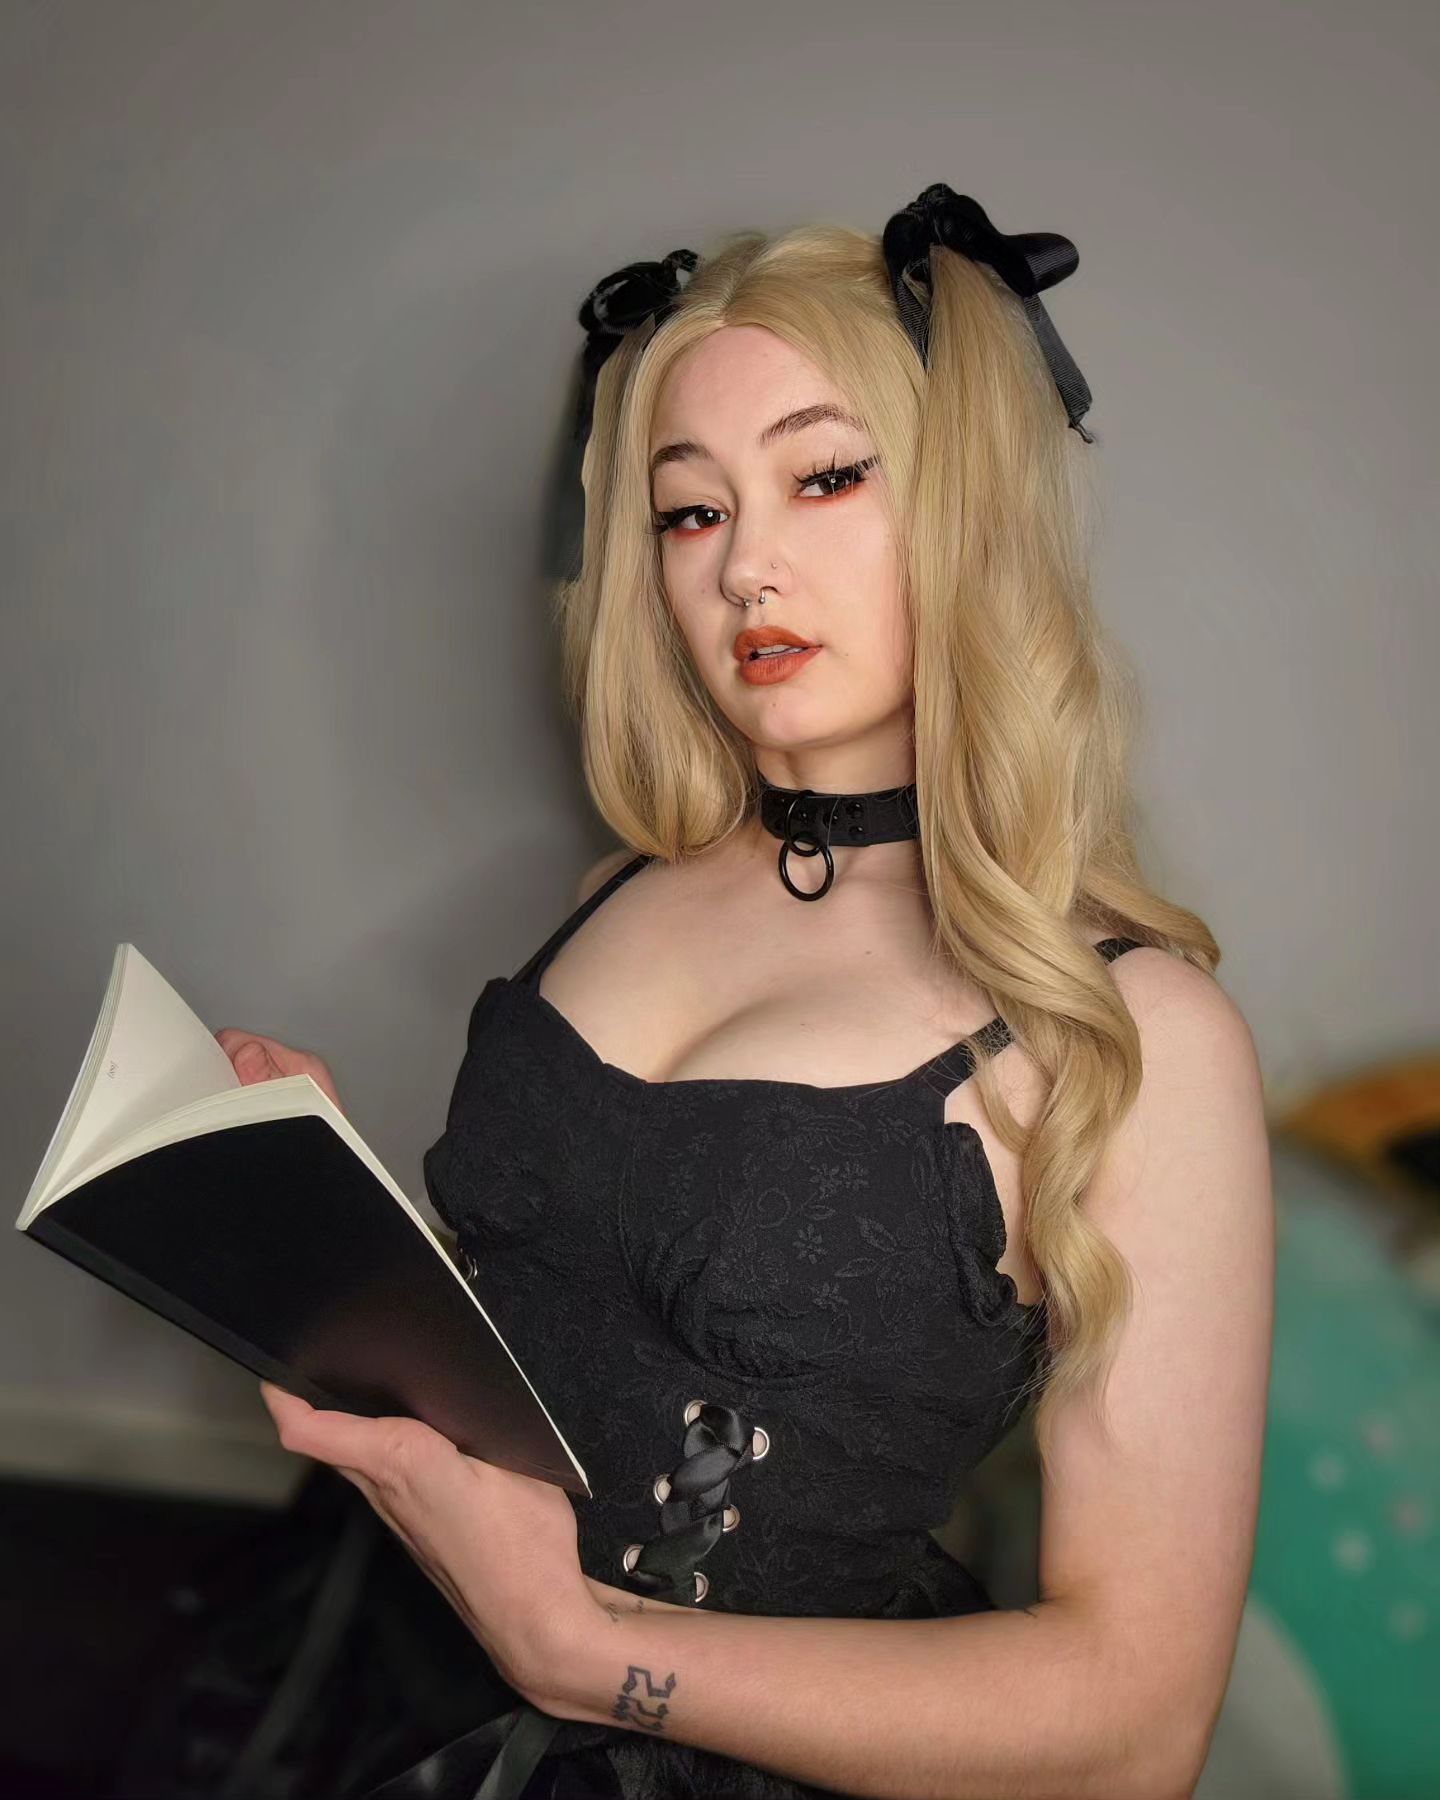 Why do we complicate things when they're so simple? 🖤📓
.
🎥 this month 👀 perhaps for free? 
.
.
.
.
.
.
.
.
.
.
.
.
.
.
.
.
.
.
#cosplay #fakebody #misaamane #misacosplay #fyp #explore #altgirl #tattoos #fashion #misaamanedeathnote #deathnote #deathnotecosplay